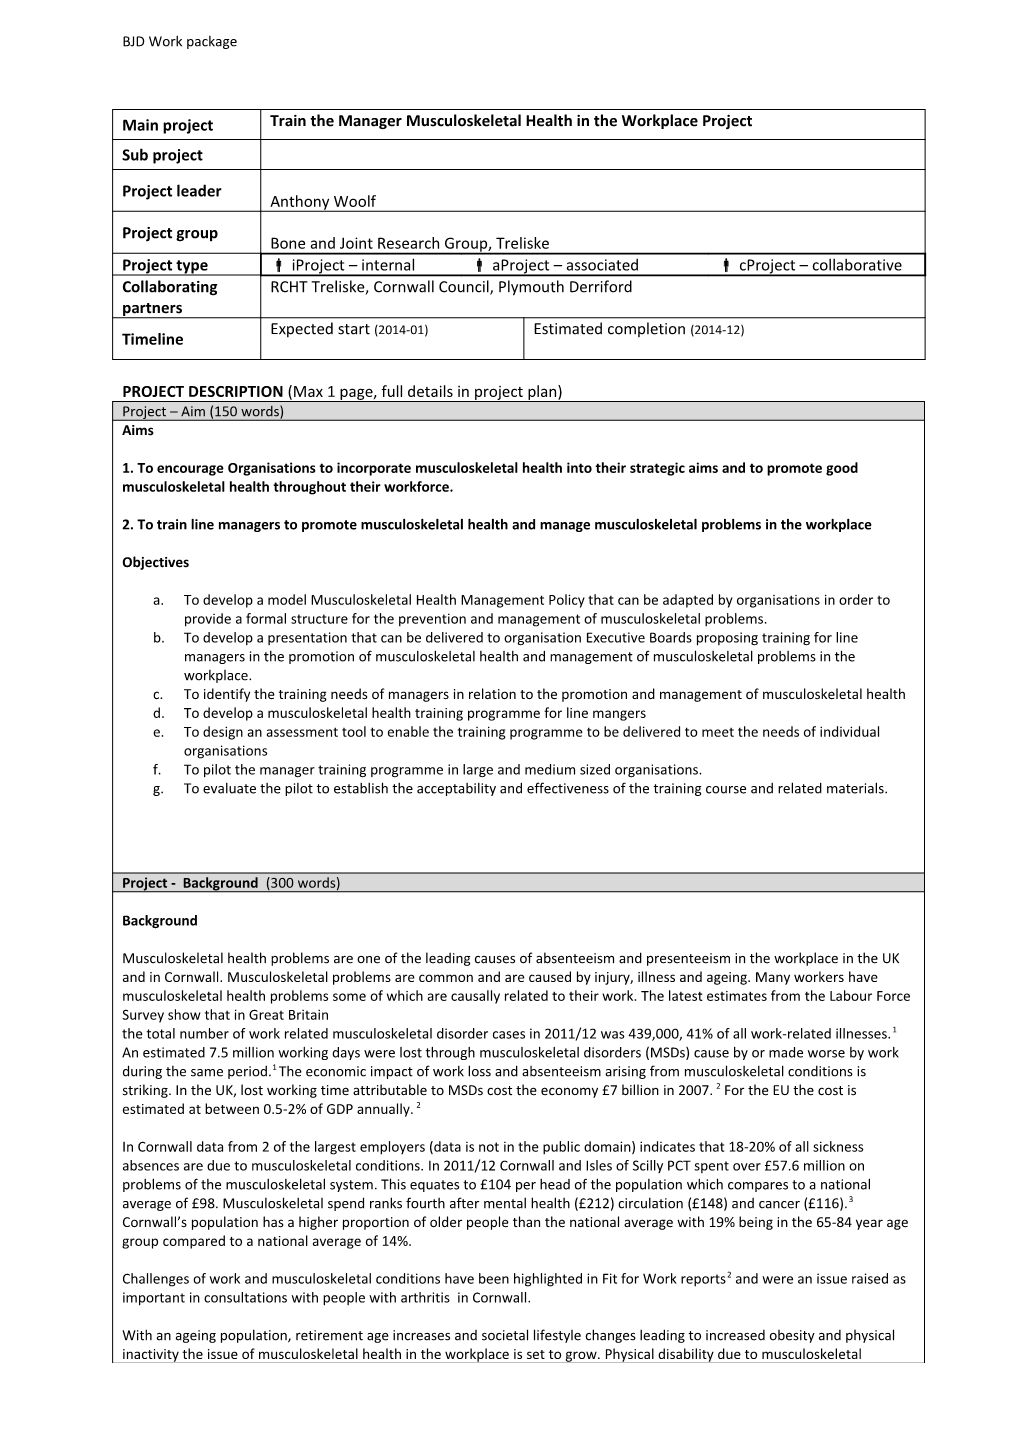 PROJECT DESCRIPTION (Max 1 Page, Full Details in Project Plan)